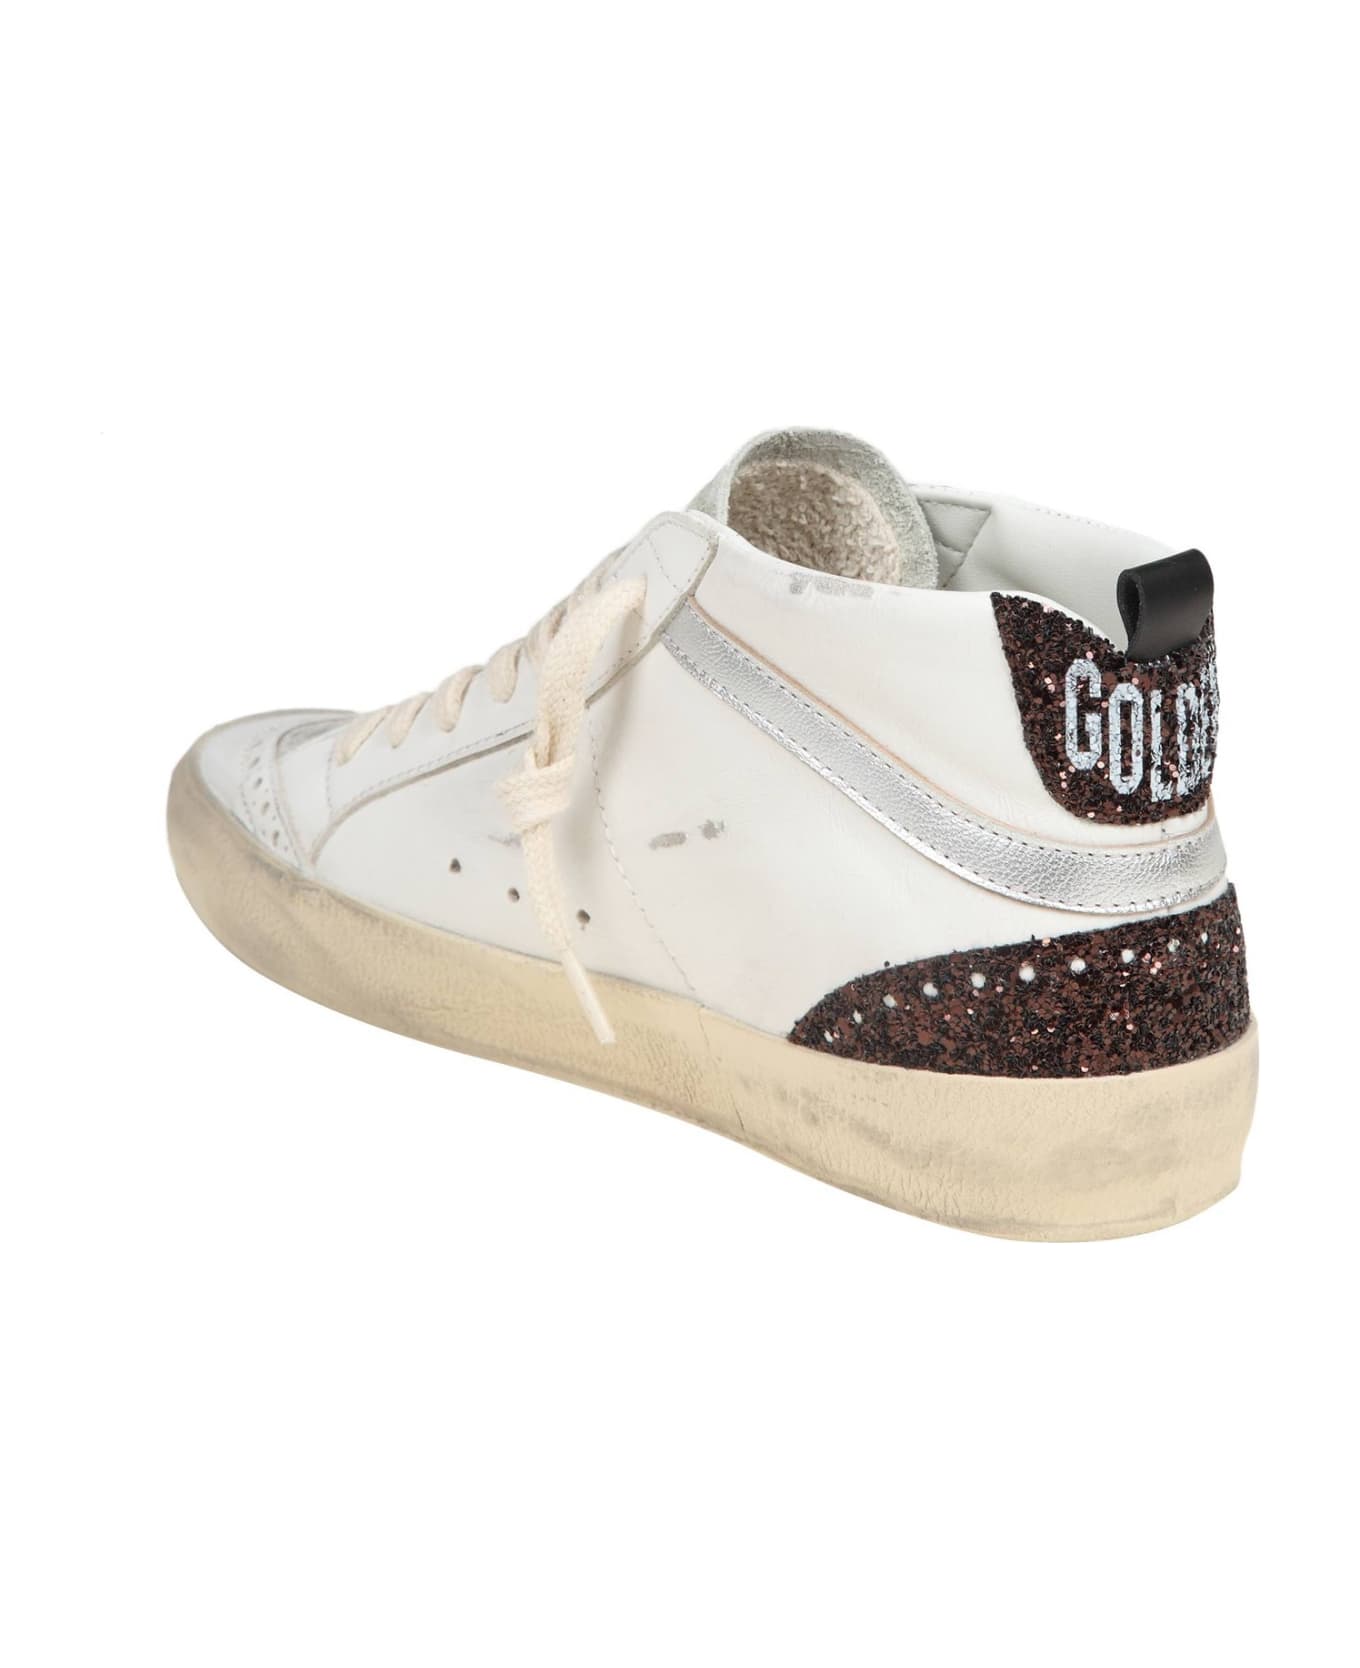 Golden Goose Mid Star In Leather And Suede With Glitter Star - White/Gold スニーカー